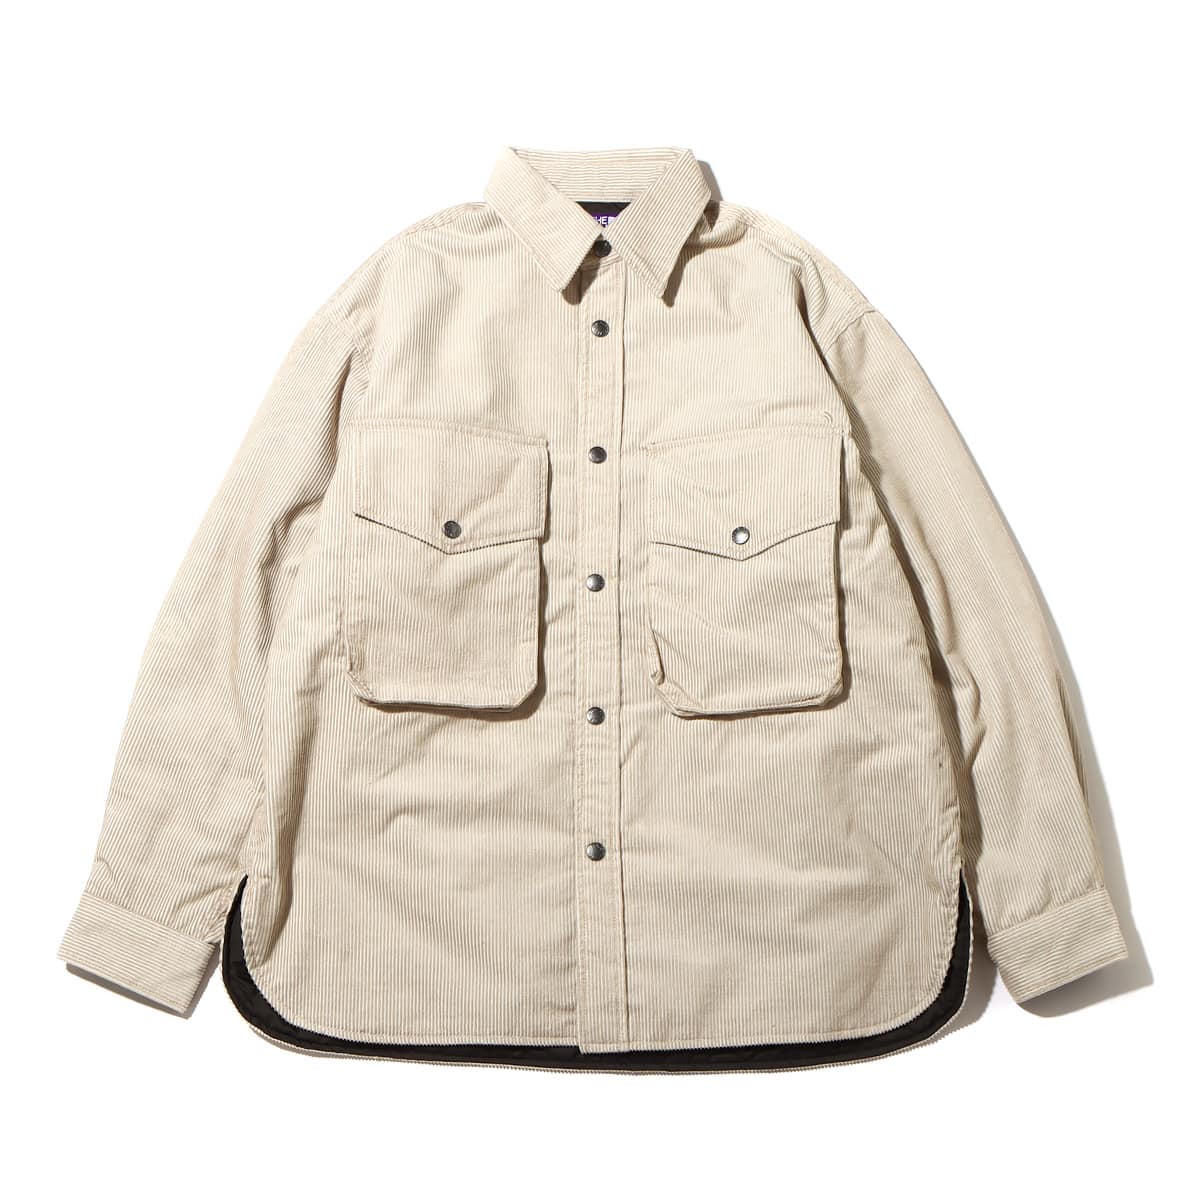 THE NORTH FACE PURPLE LABEL Corduroy Insulation Shirt Jacket